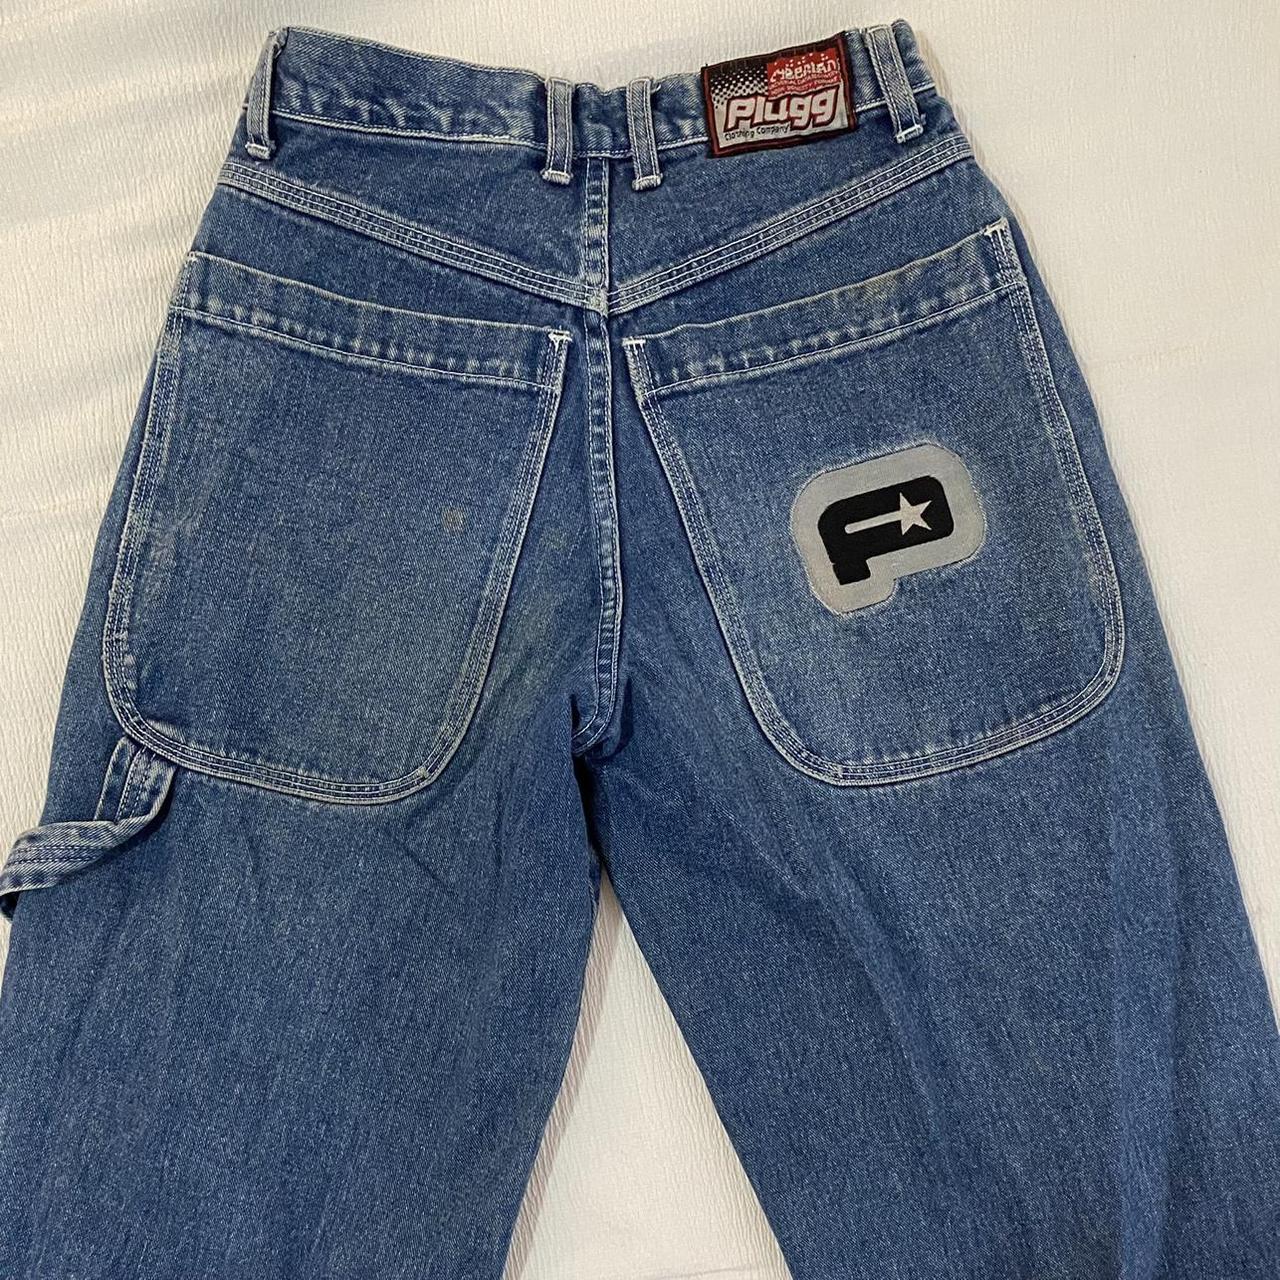 The BEST cargo jeans Brand PLUGG vintage high... - Depop